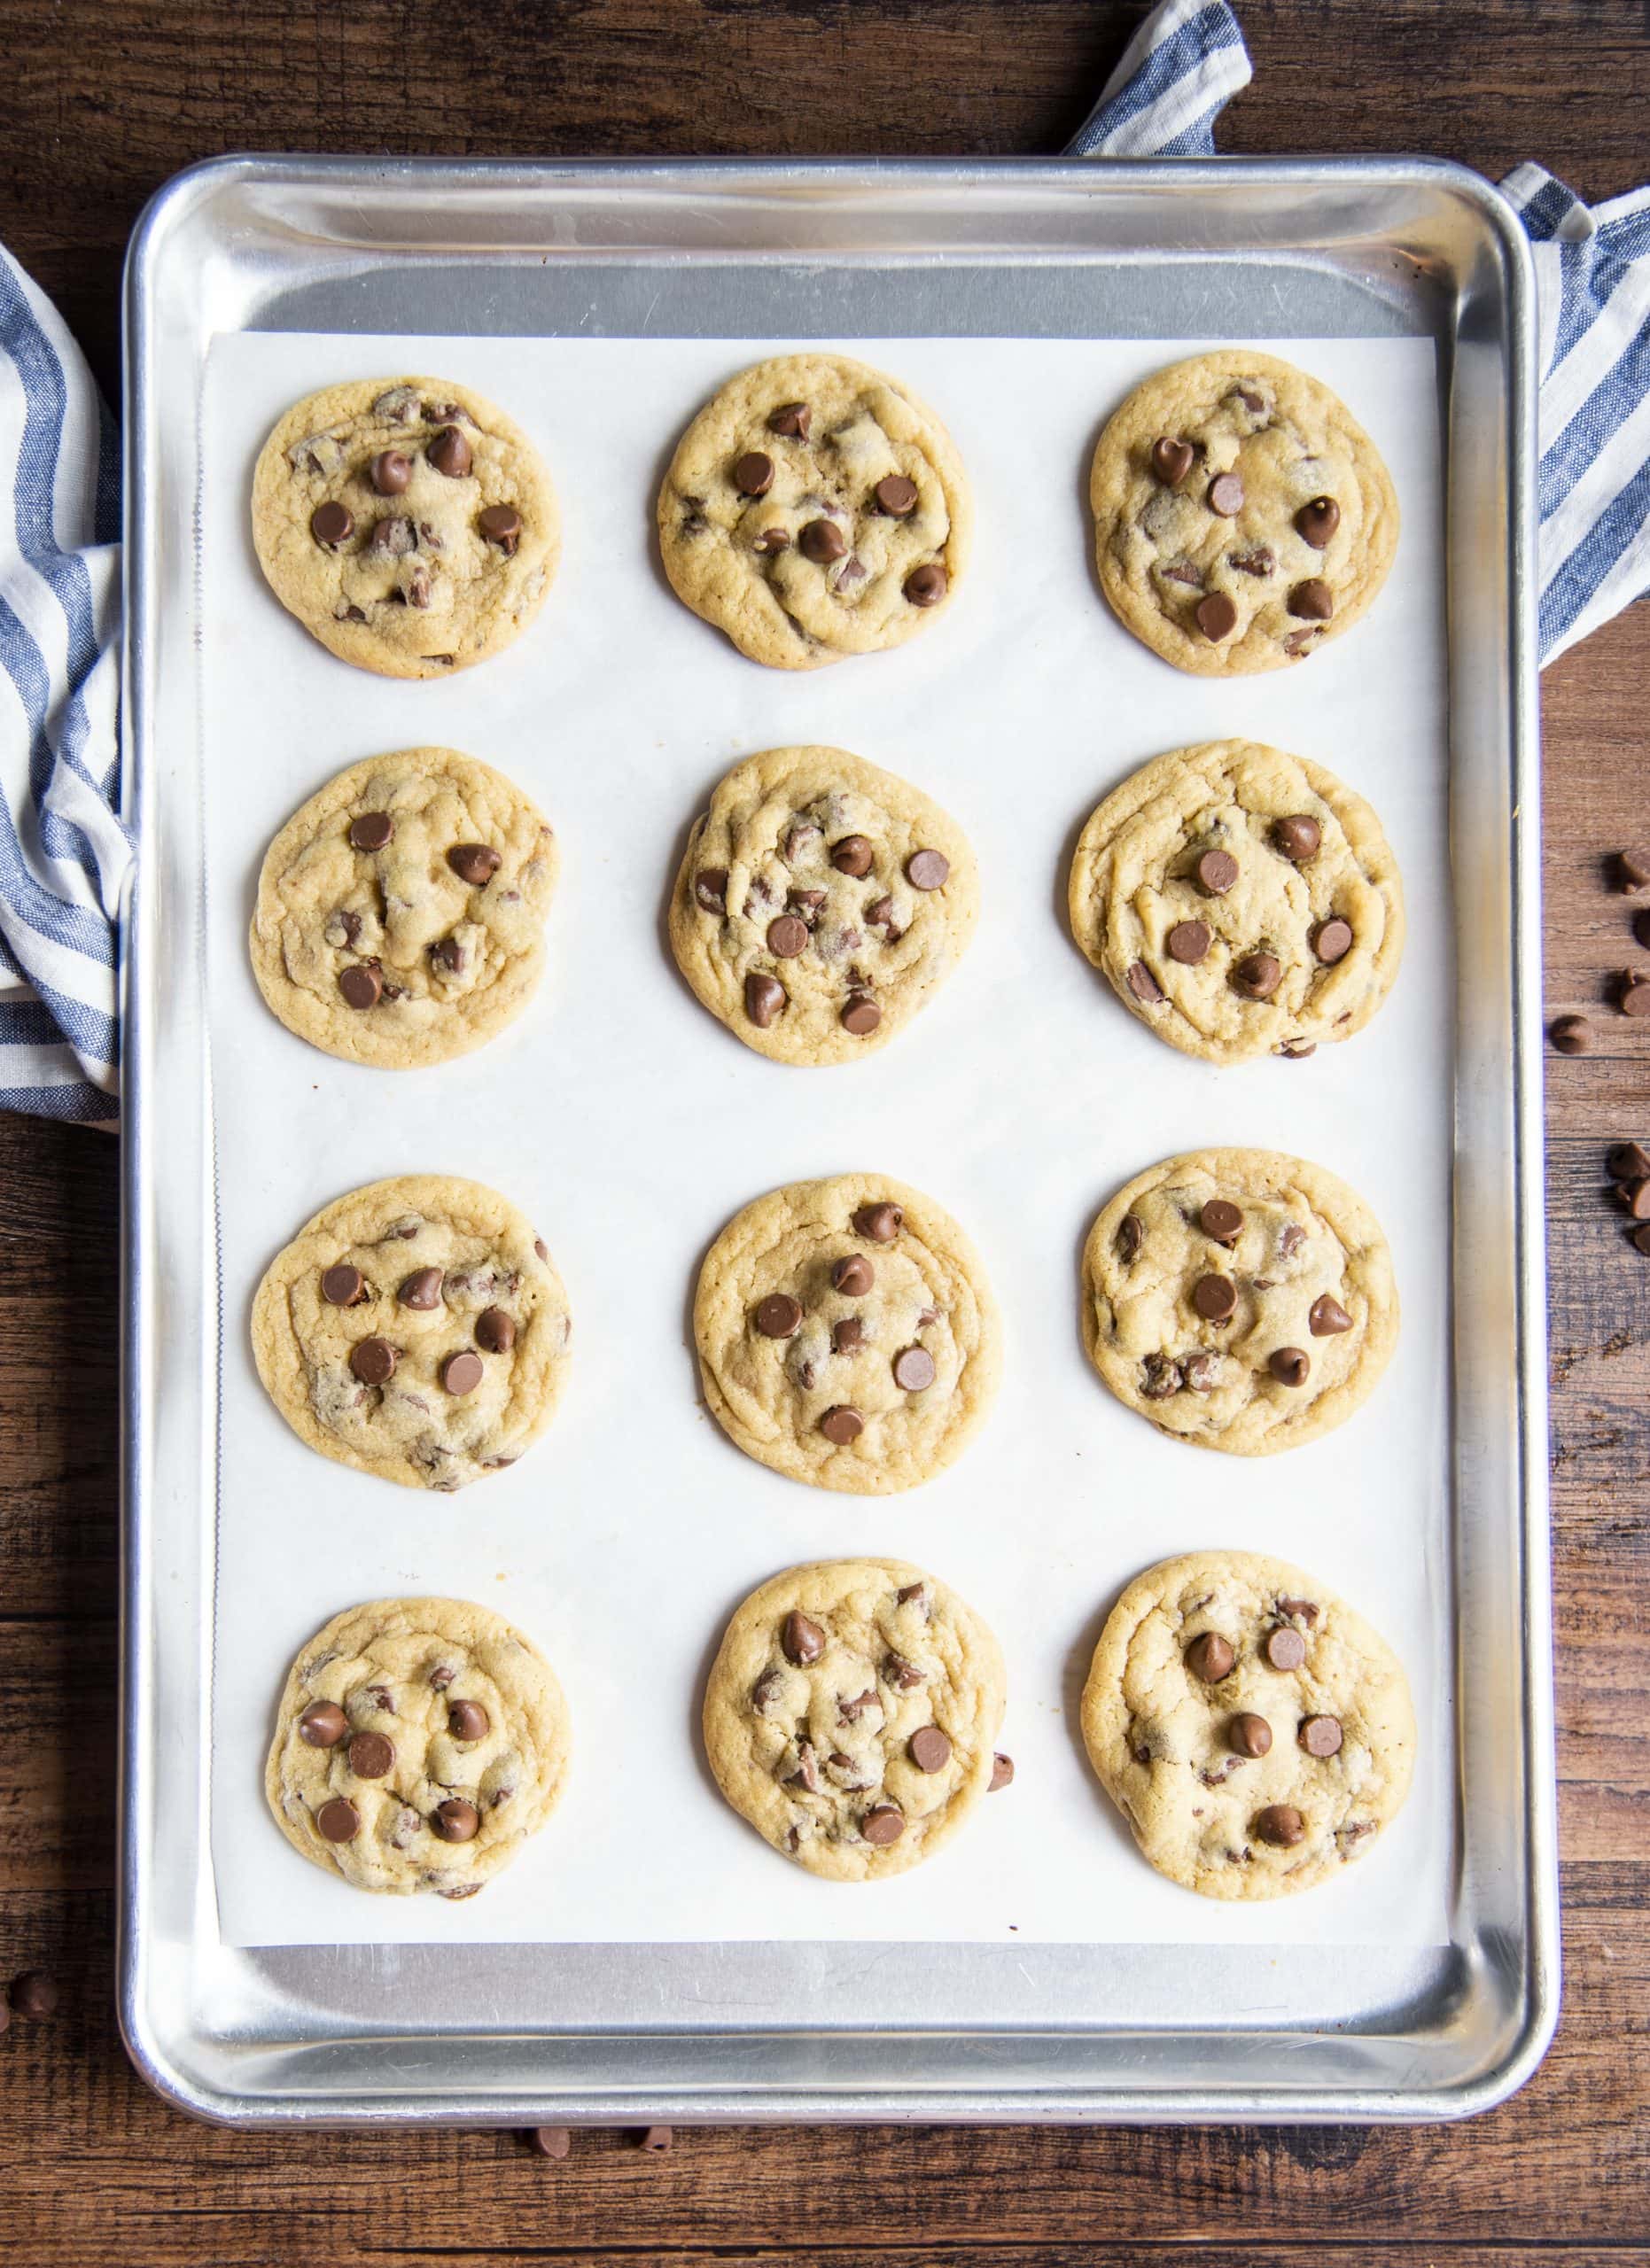 A pan of chocolate chip pudding cookies on parchment paper.